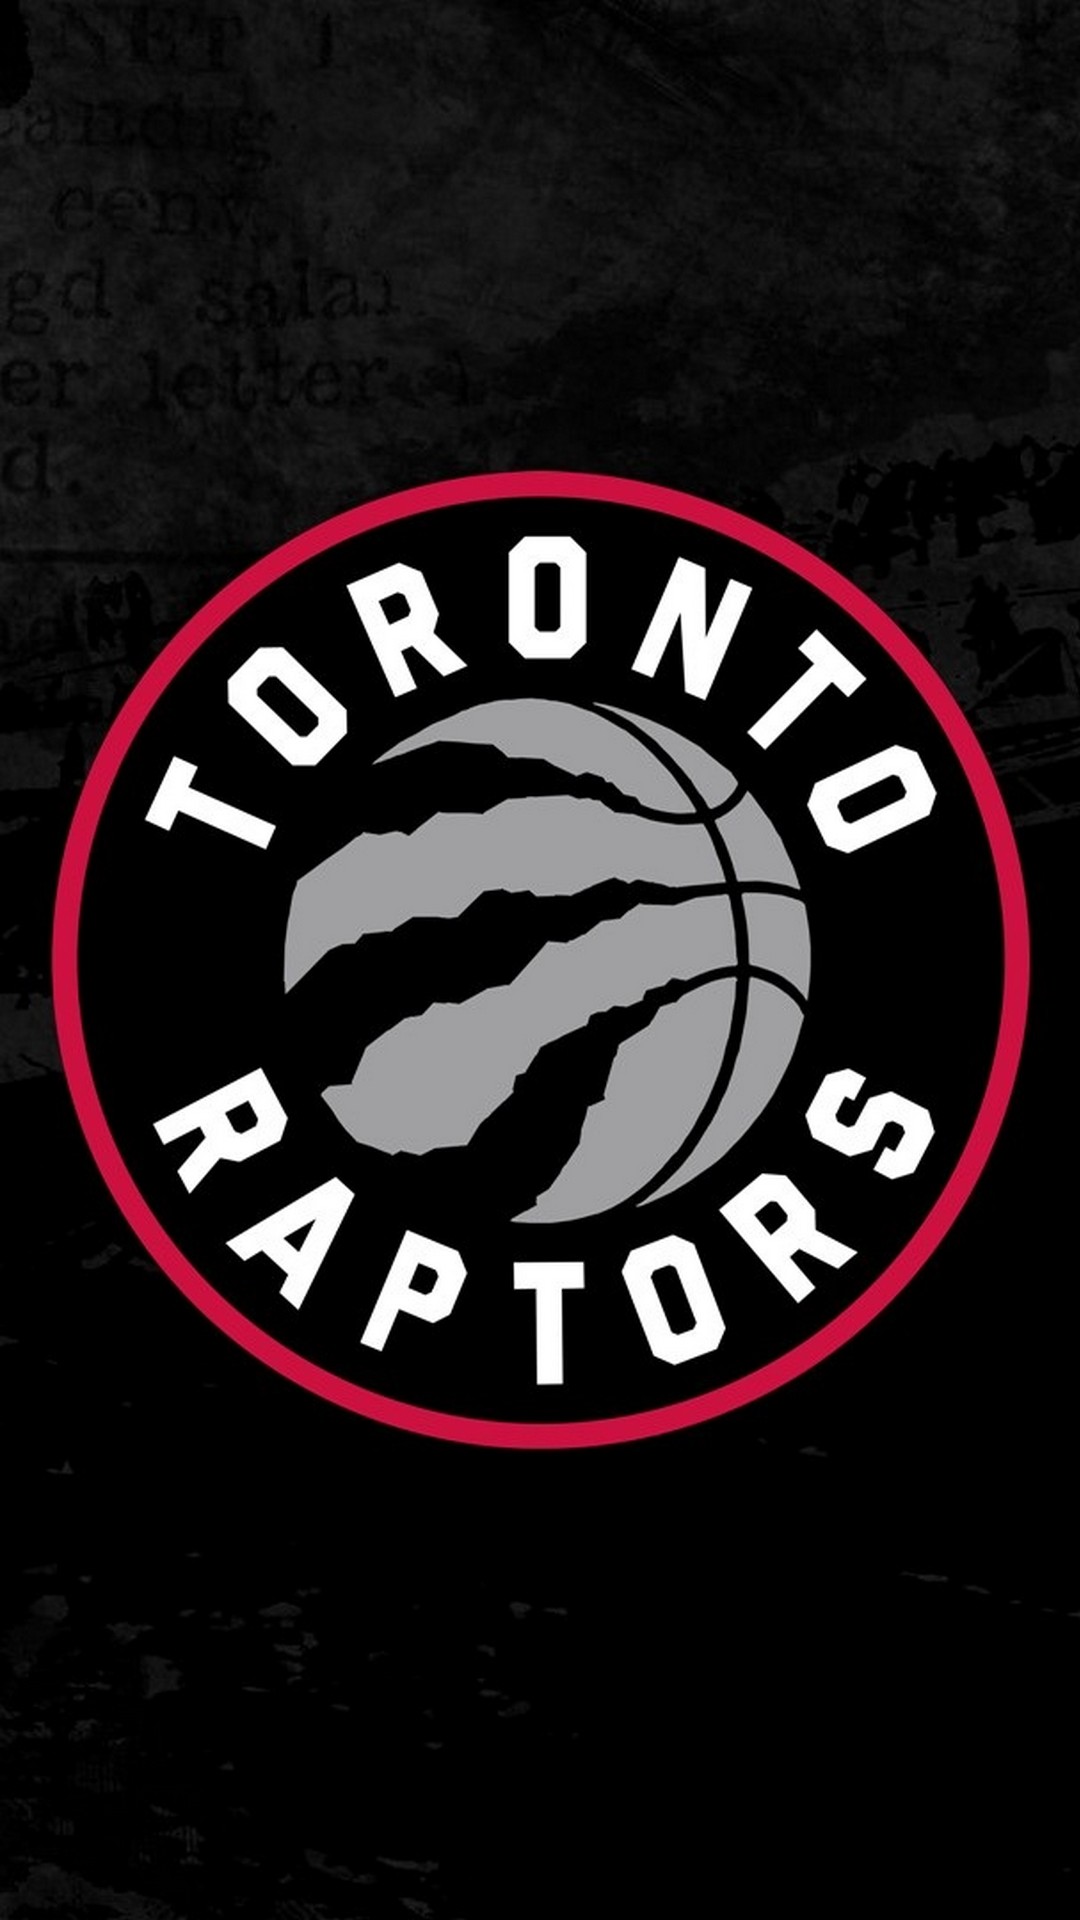 Toronto Raptors HD Wallpapers For Android with resolution 1080X1920 pixel. You can make this wallpaper for your Android backgrounds, Tablet, Smartphones Screensavers and Mobile Phone Lock Screen